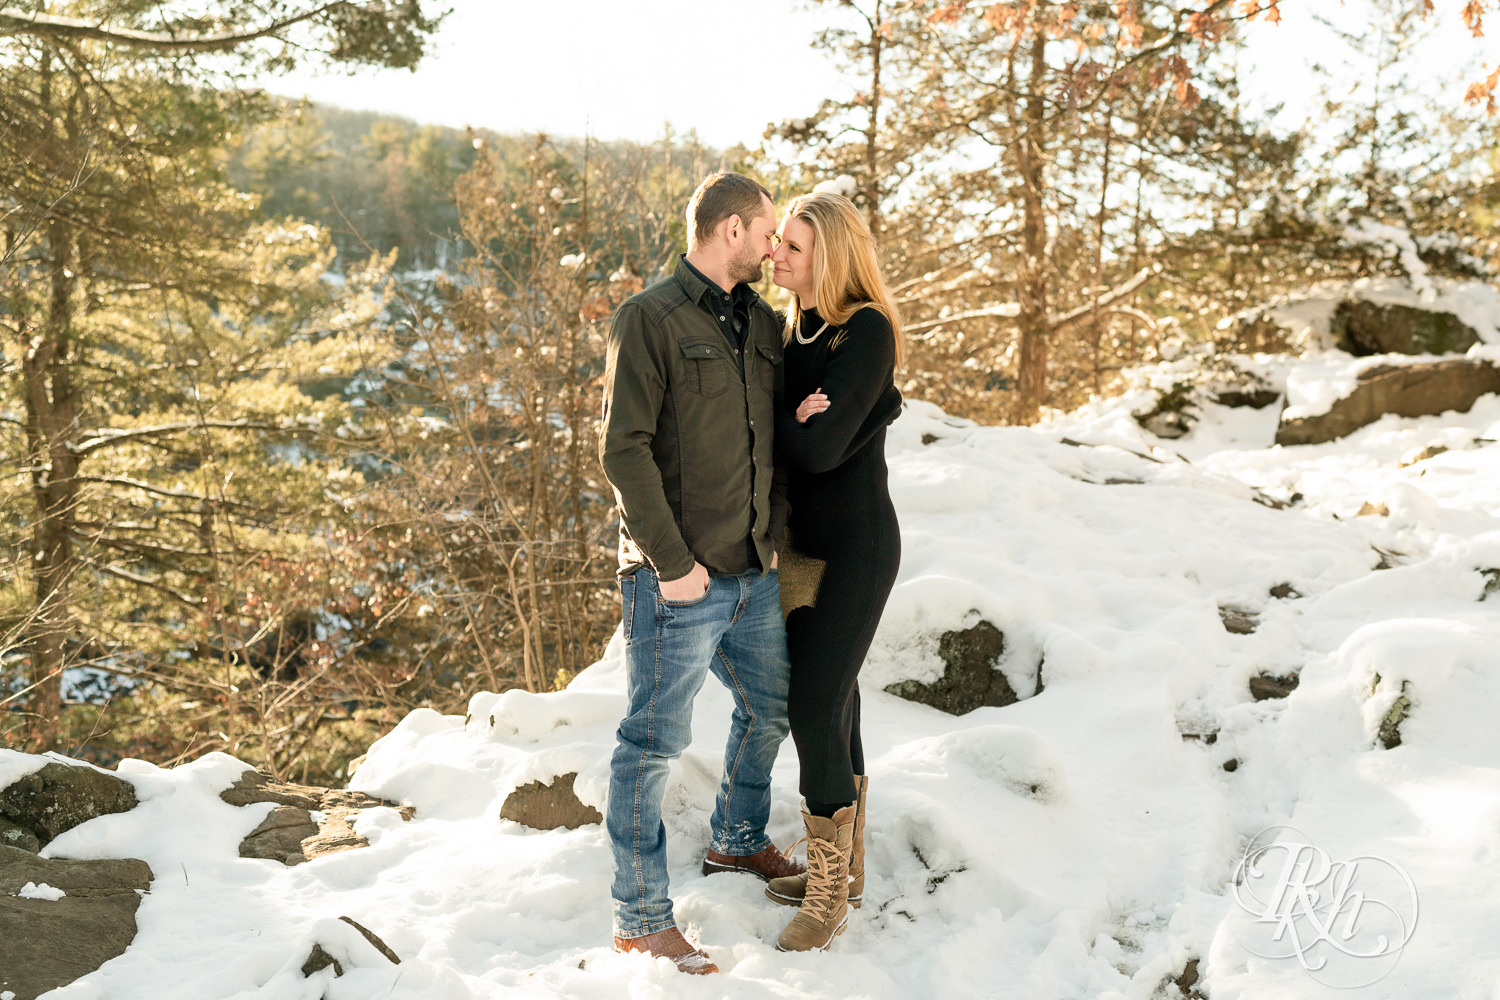 Man in jeans and woman in black dress smile in the snow at sunrise during Taylor's Falls engagement photography session.